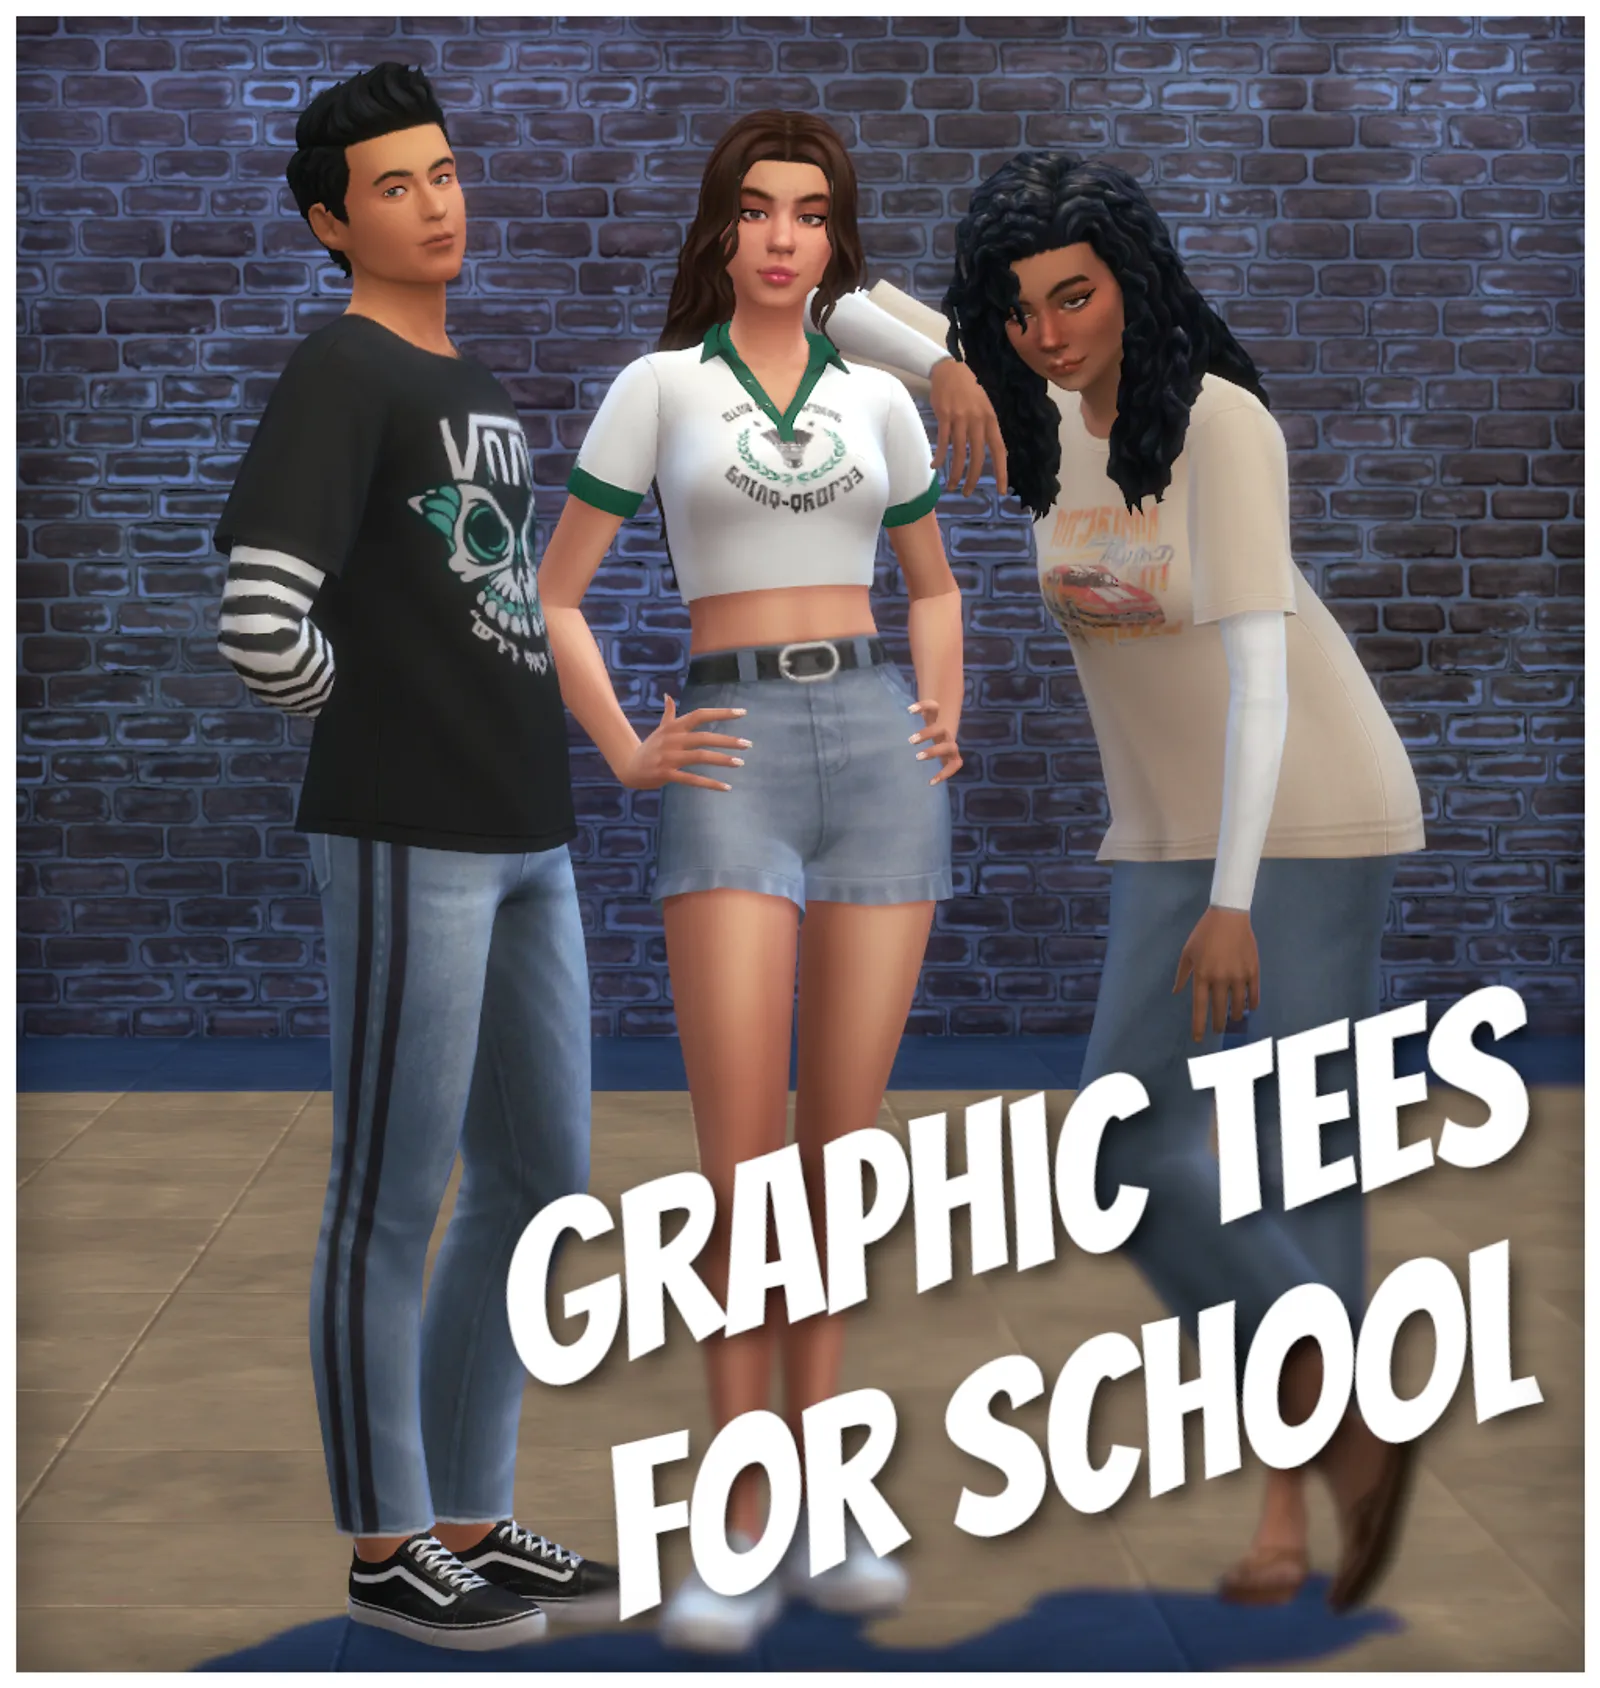 Graphic tees for School